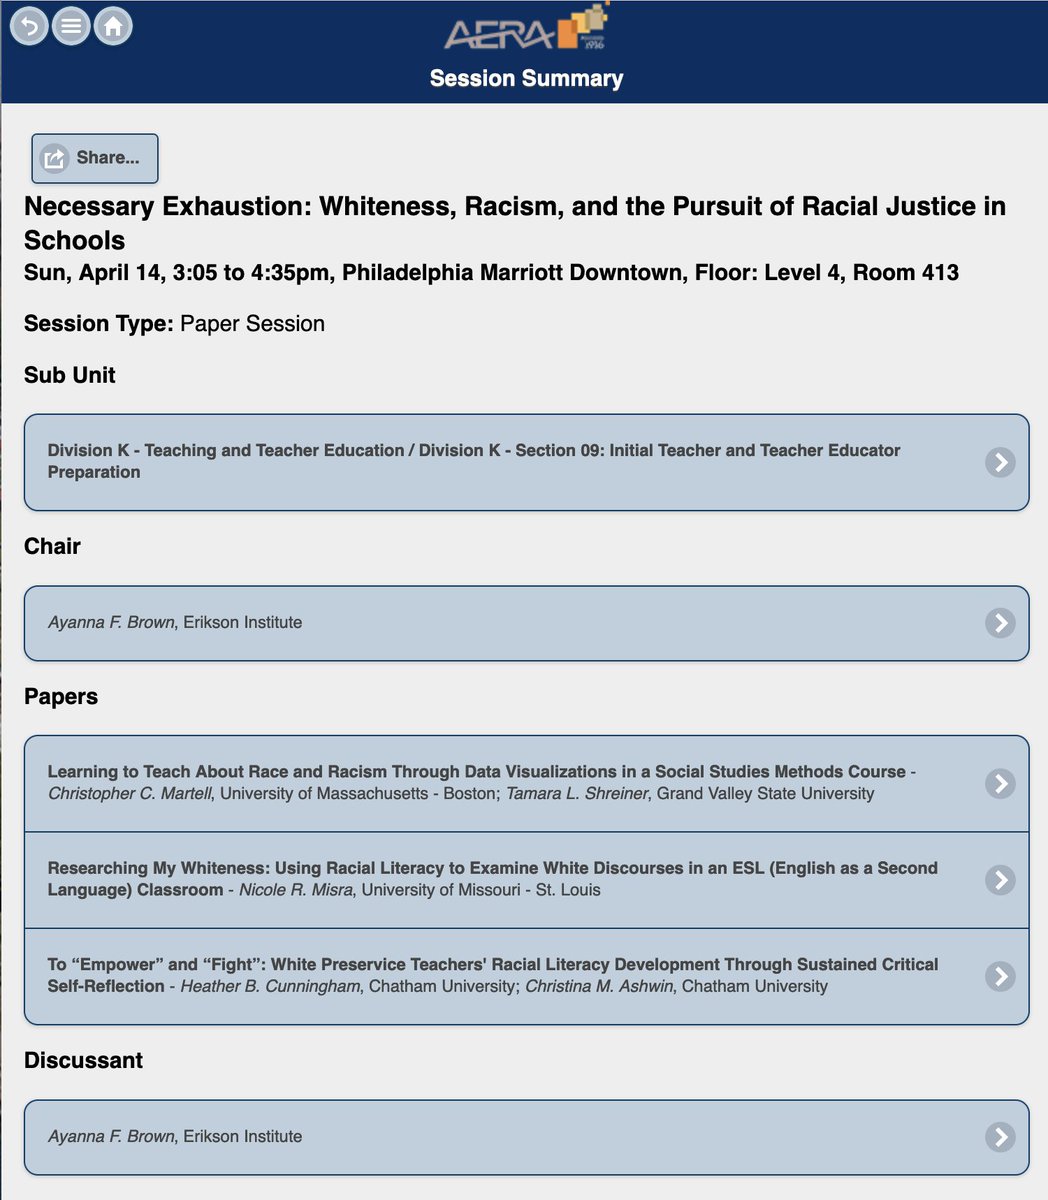 Are you still at #AERA24? Come join our @AERADivisionK session on Whiteness, Racism, and Racial Justice in teacher education. @tammy_shreiner and I will present our research on preparing teachers to use data visualizations for anti-racism. Mariott Level 4 Room 413 at 3:05 today.